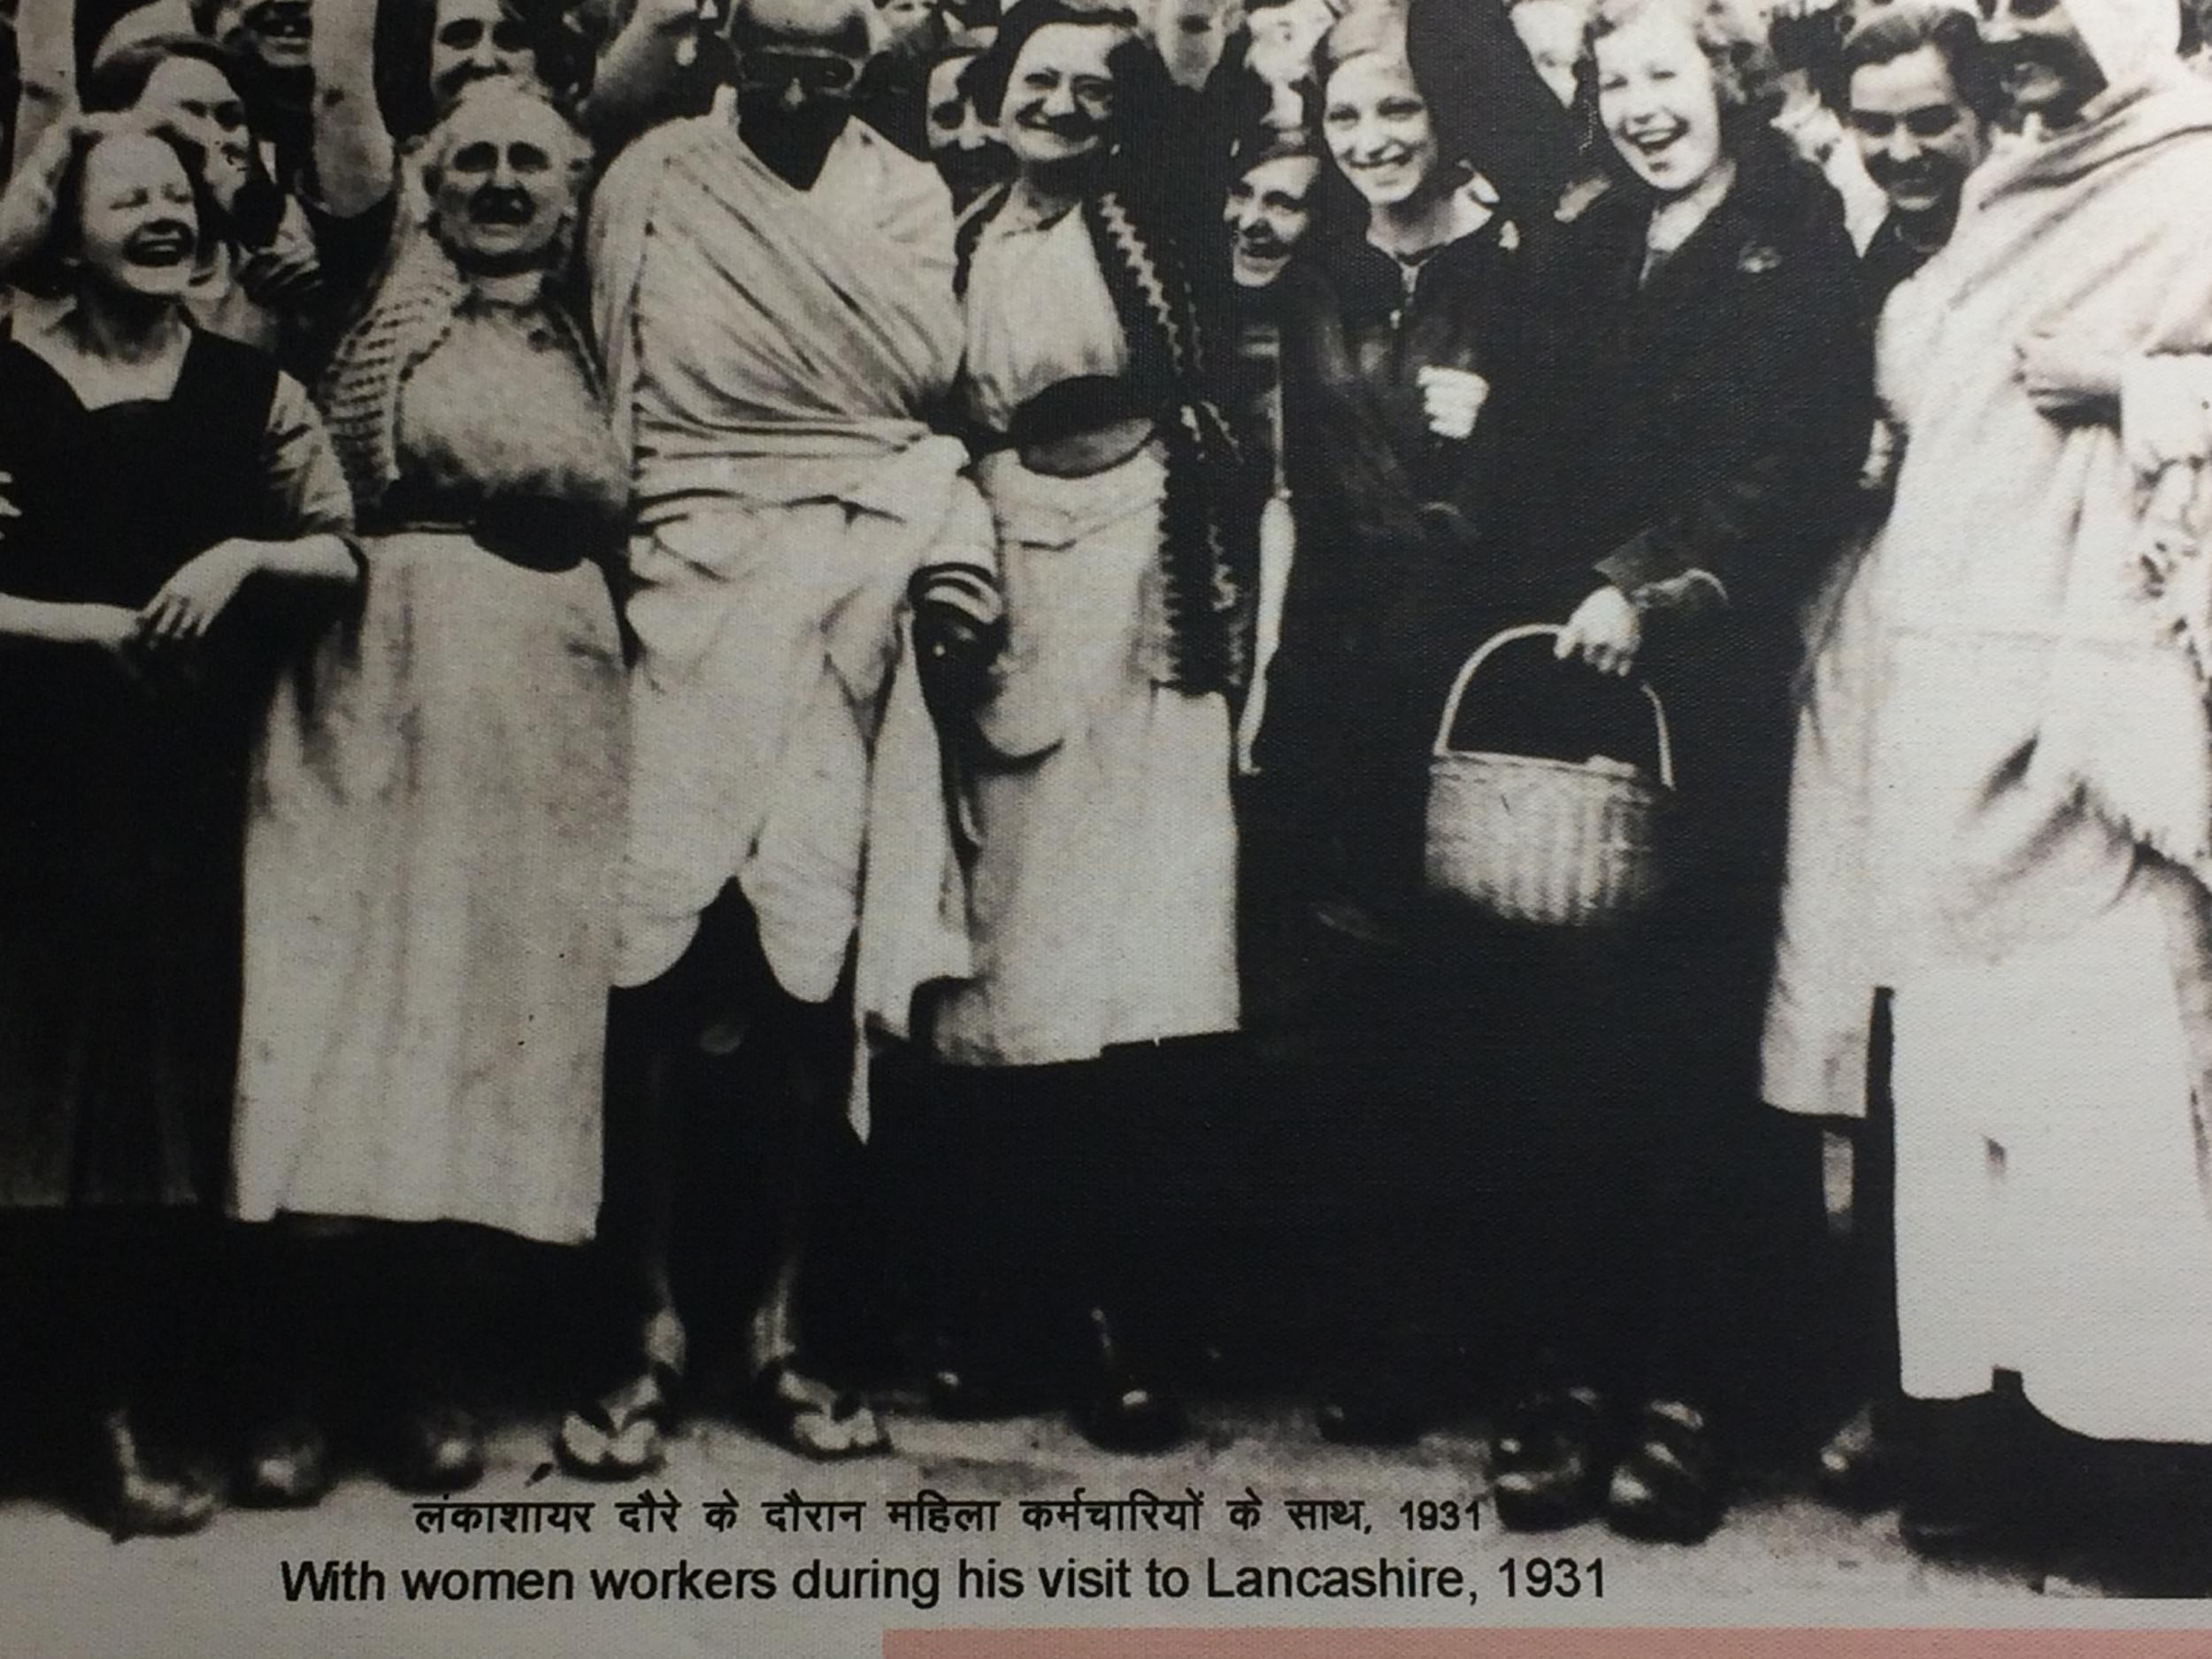 A picture of Gandhi with weavers in the Lancashire town of Darwen